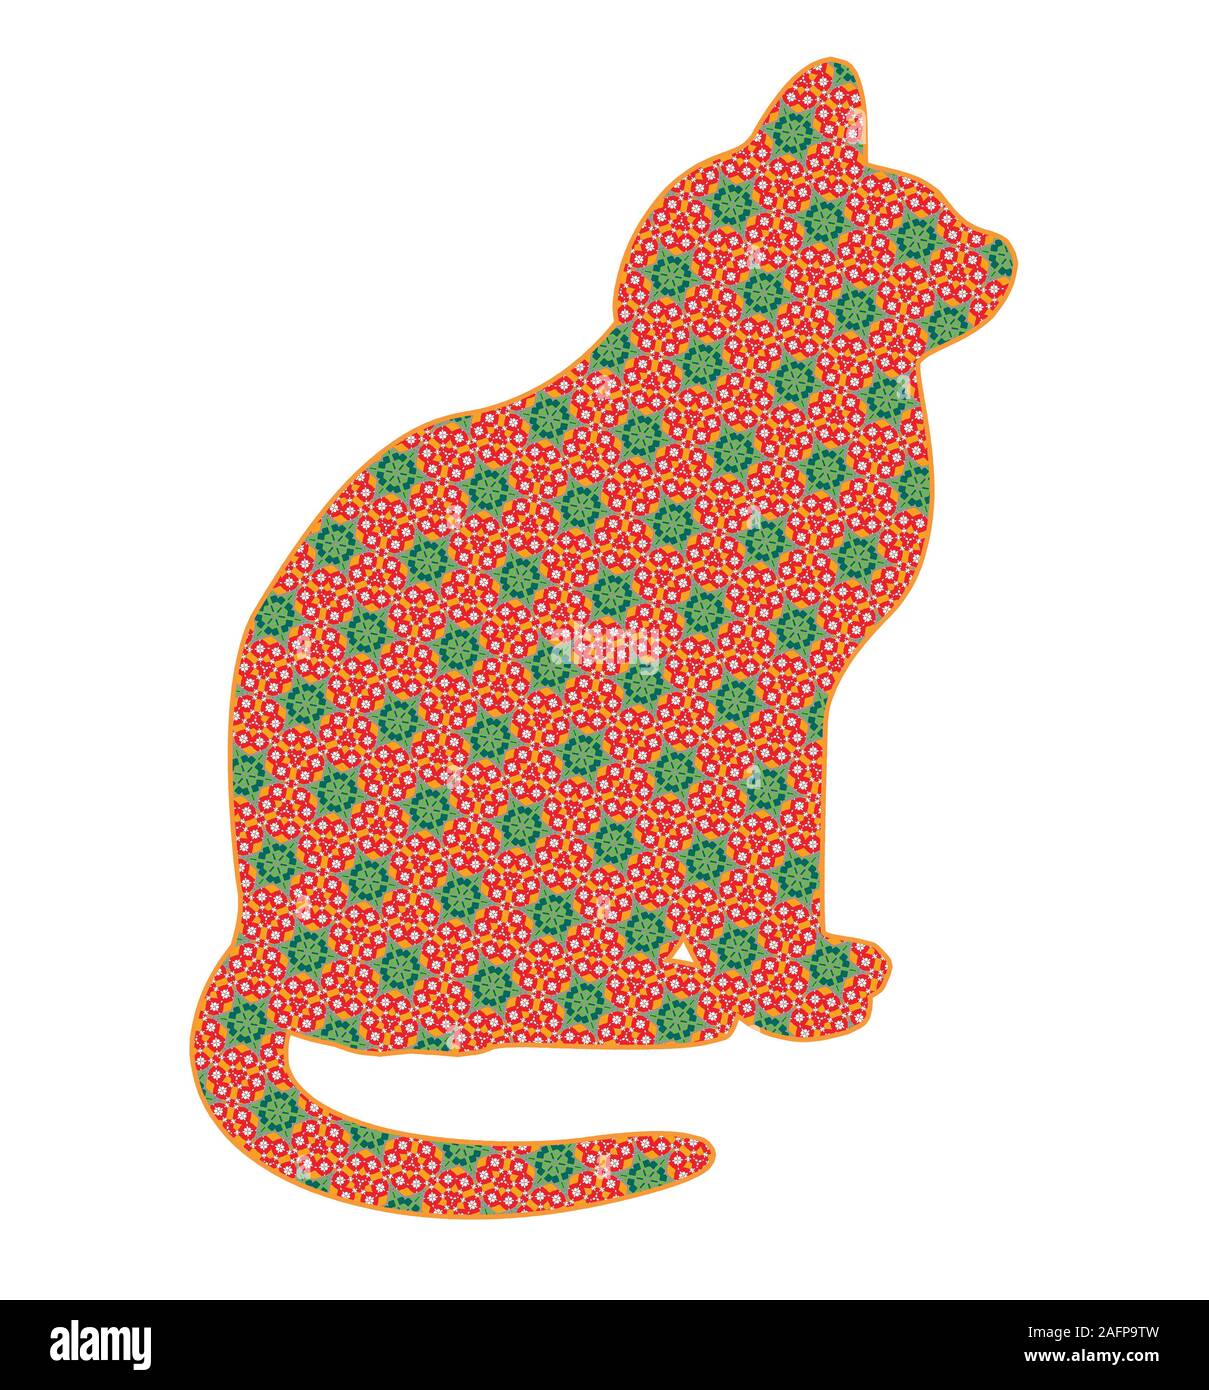 Green and red fun patterned Christmas cat for the holiday season, a quirky artistic graphic design resource cutout isolated on white Stock Photo